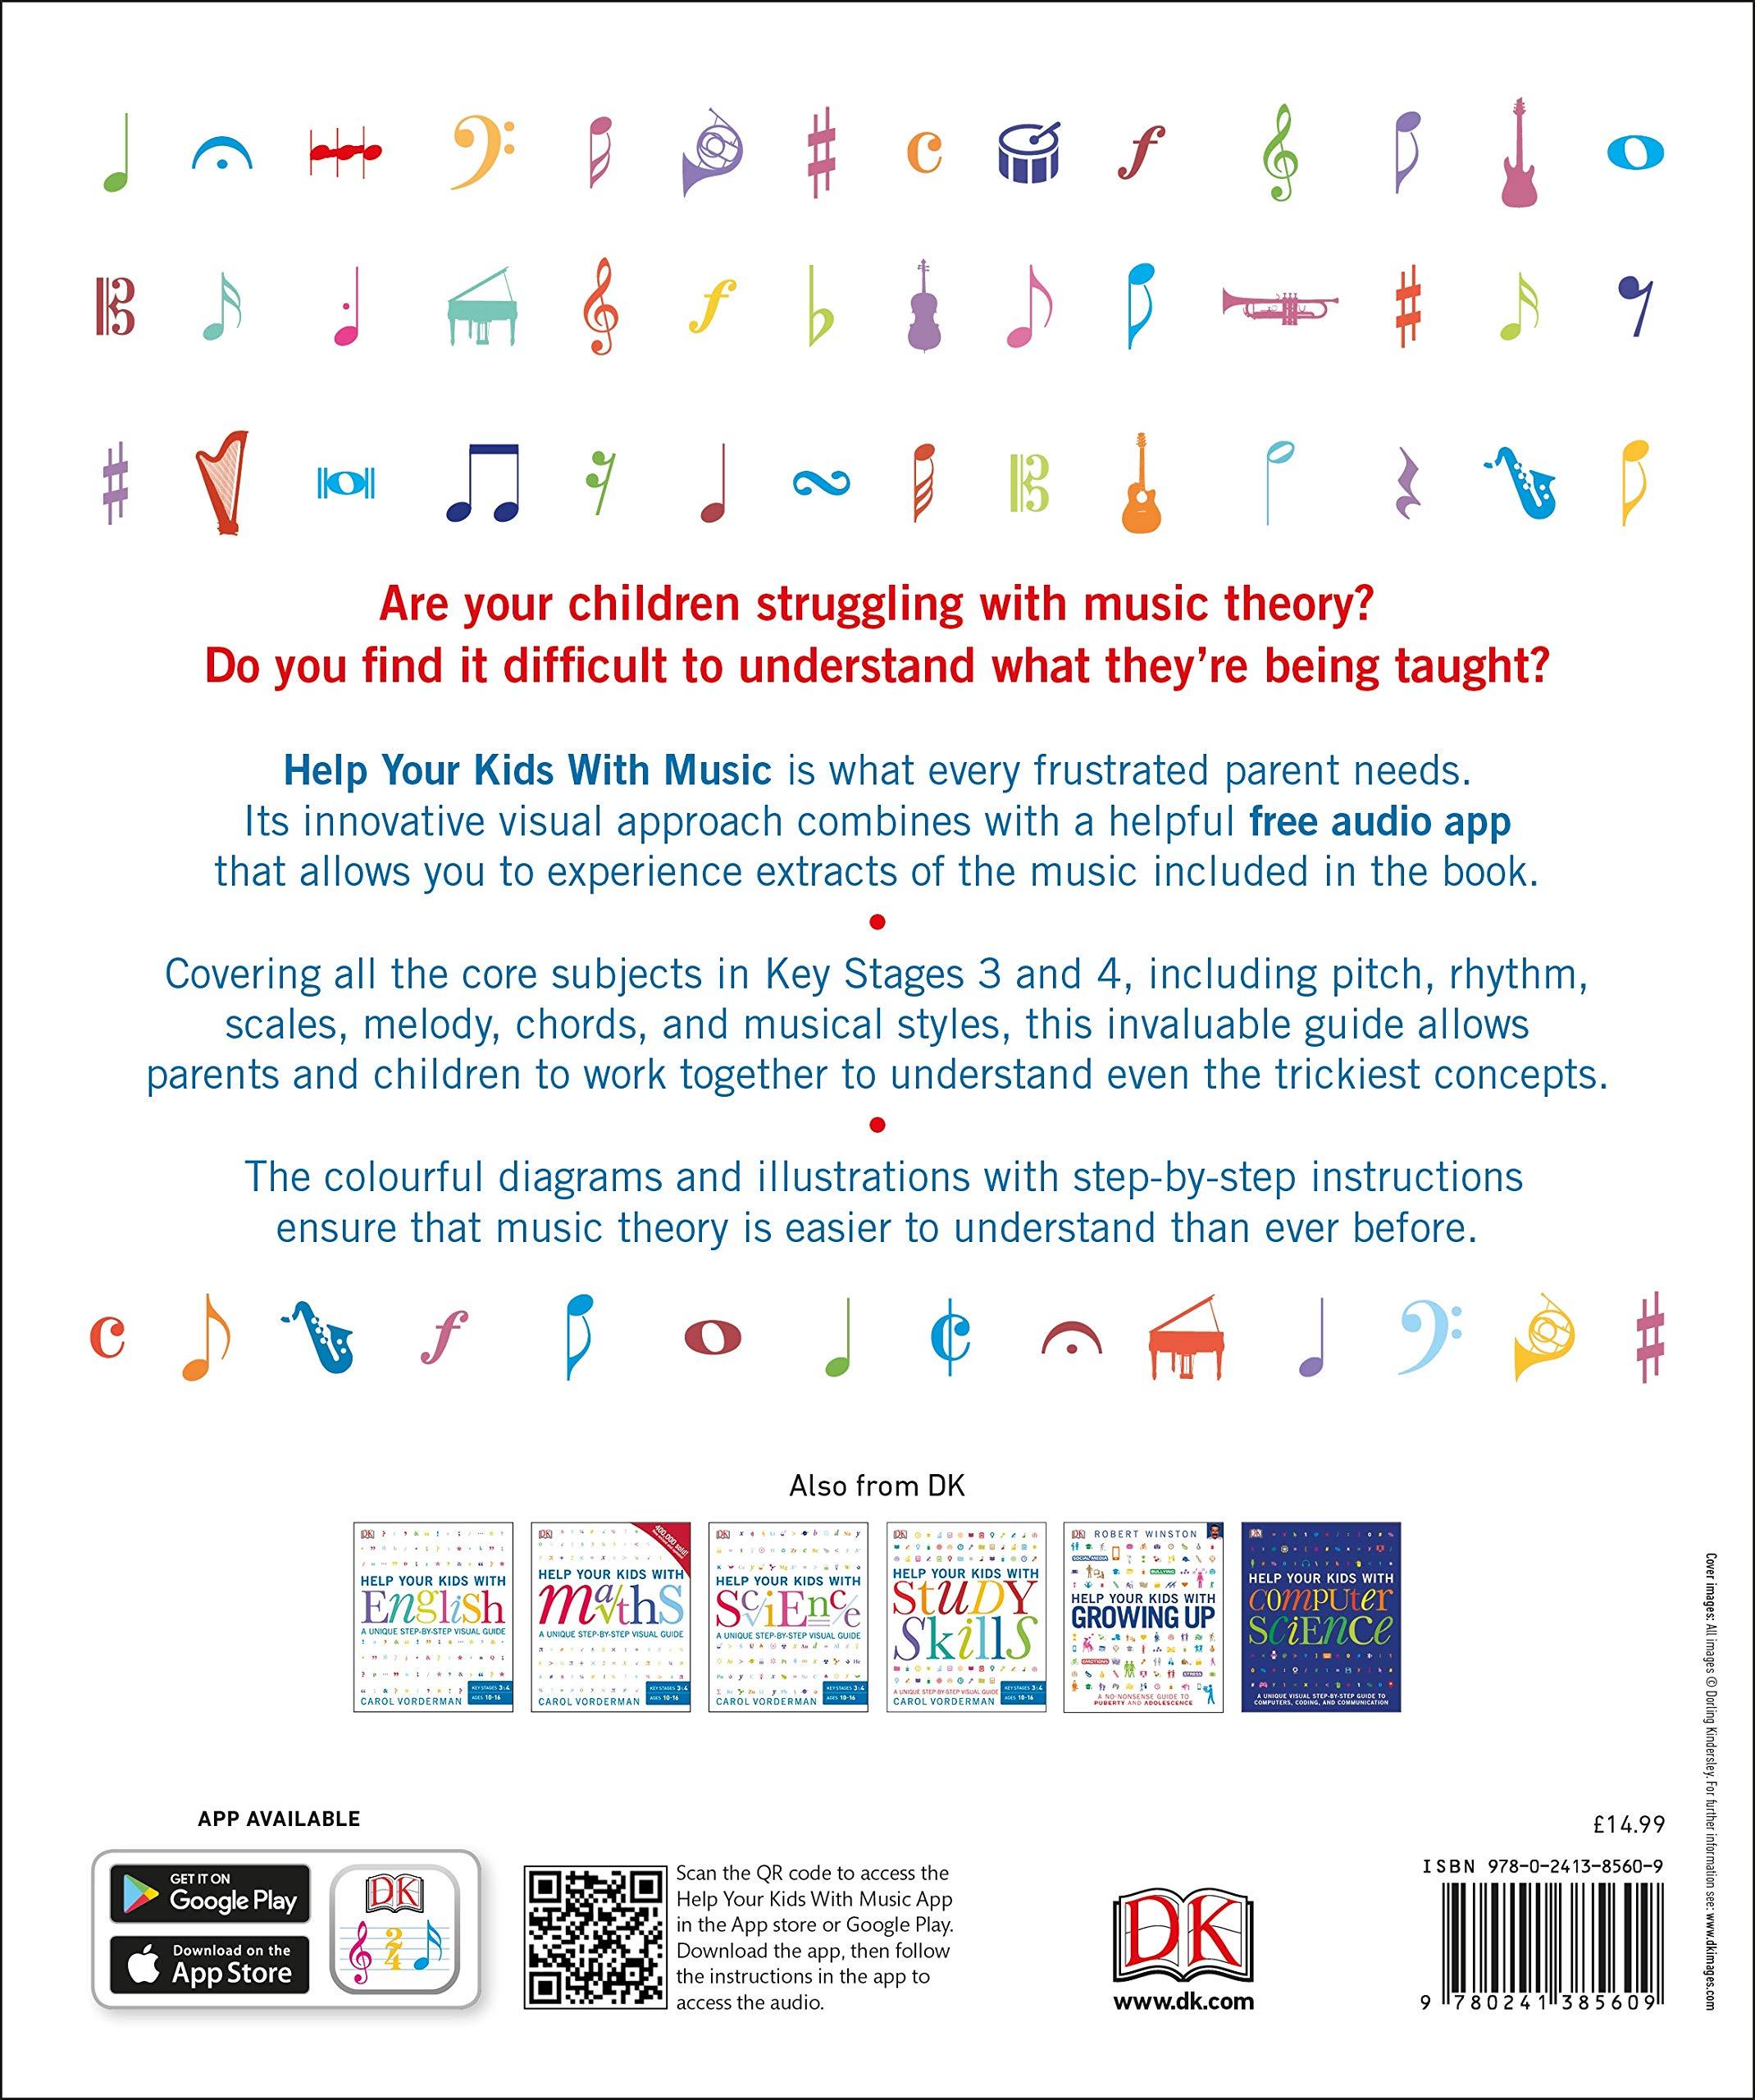 Help Your Kids With Music: A Unique Step-By-Step Visual Guide